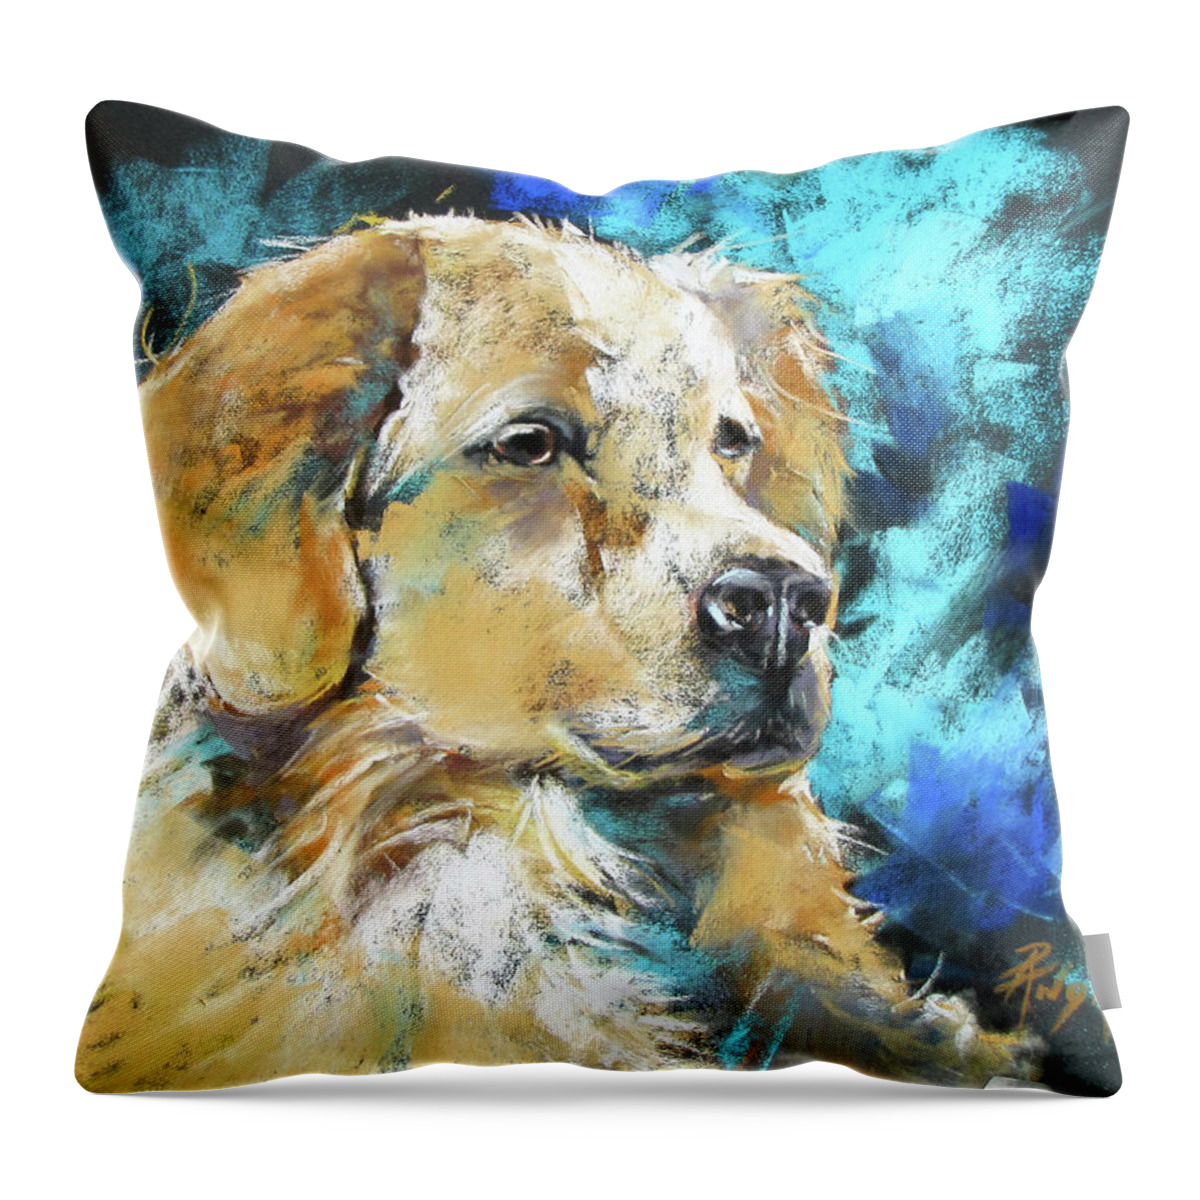 Pastel Throw Pillow featuring the painting Intent by Rae Andrews